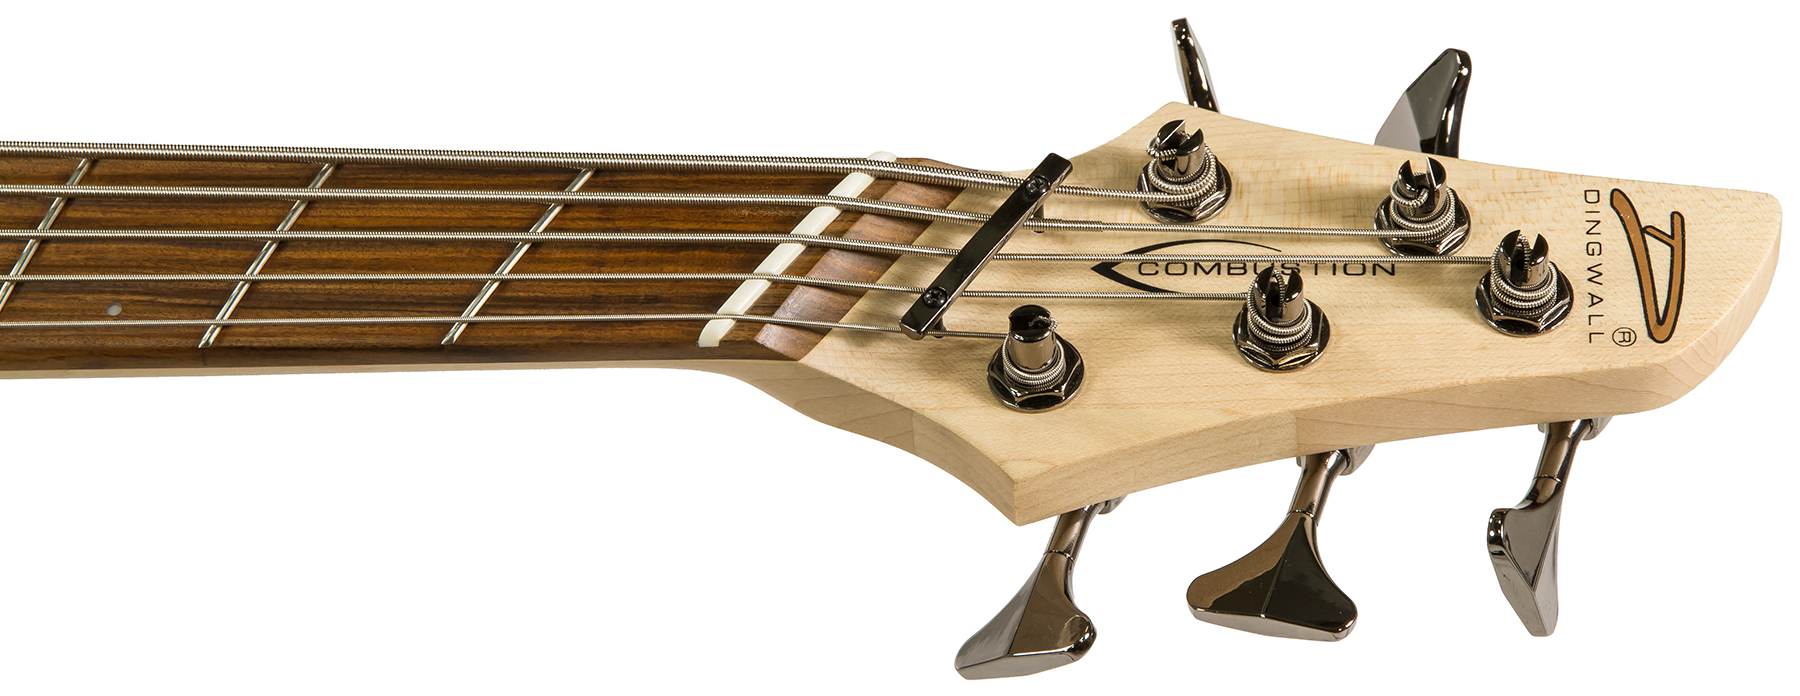 Dingwall Combustion Cb2 5c 2pu Active Pf - Vintage Burst - Solid body electric bass - Variation 4